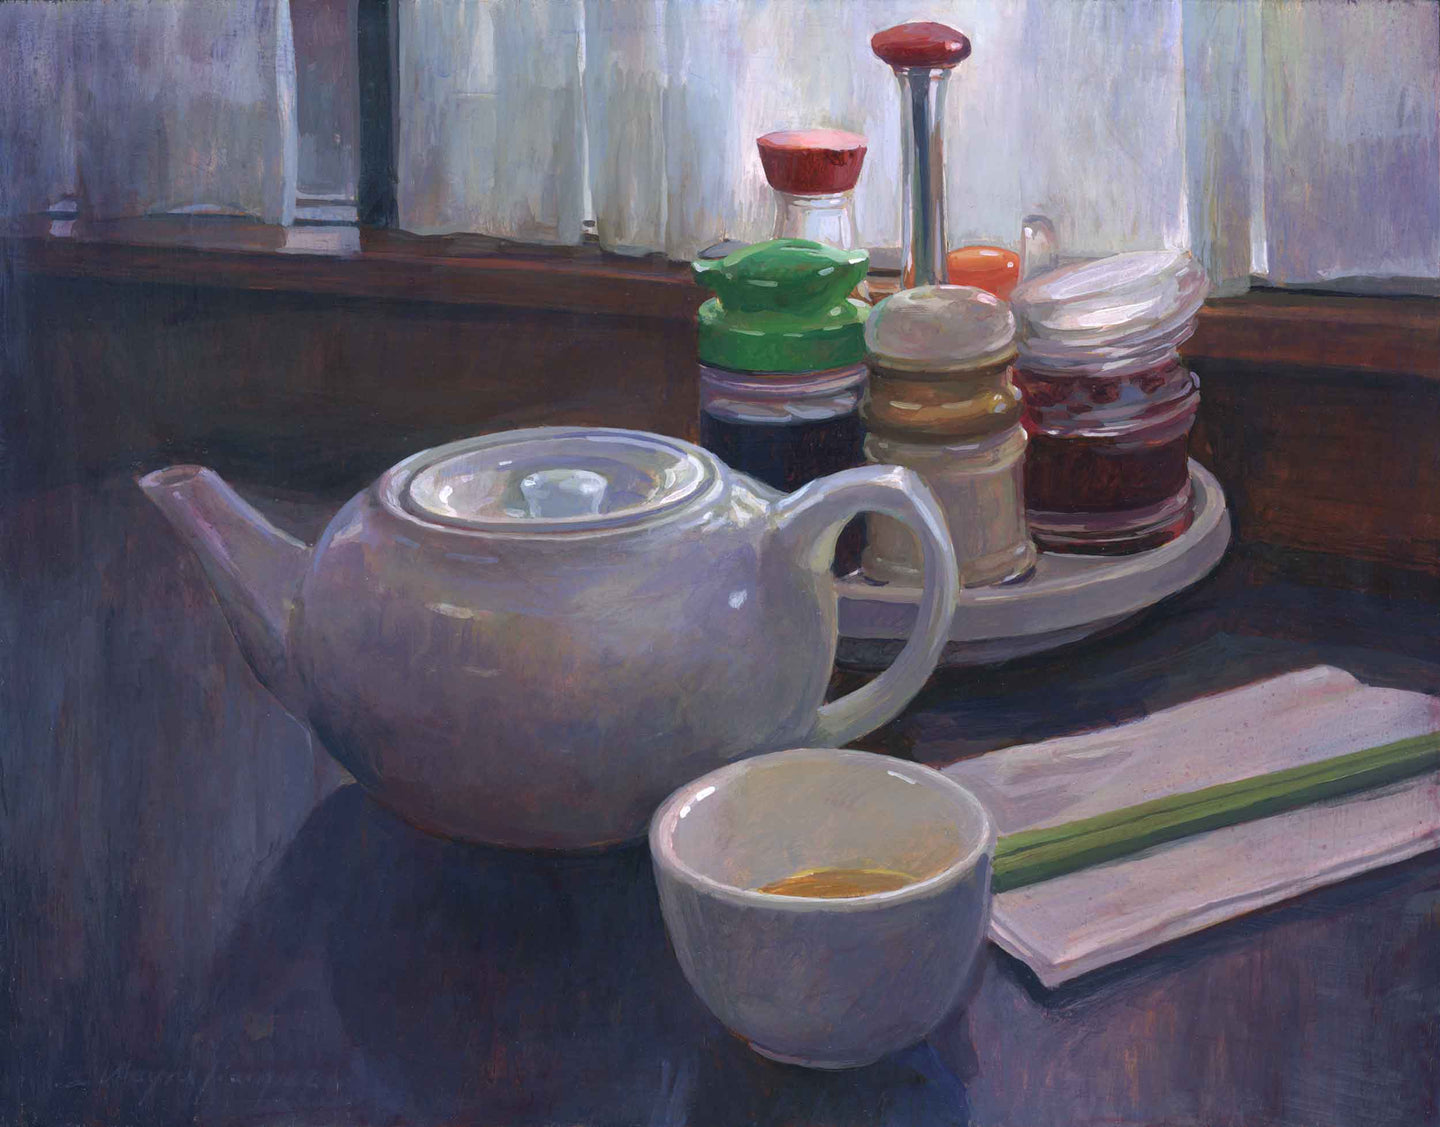 62. Round Teapot and Condiments by the Window